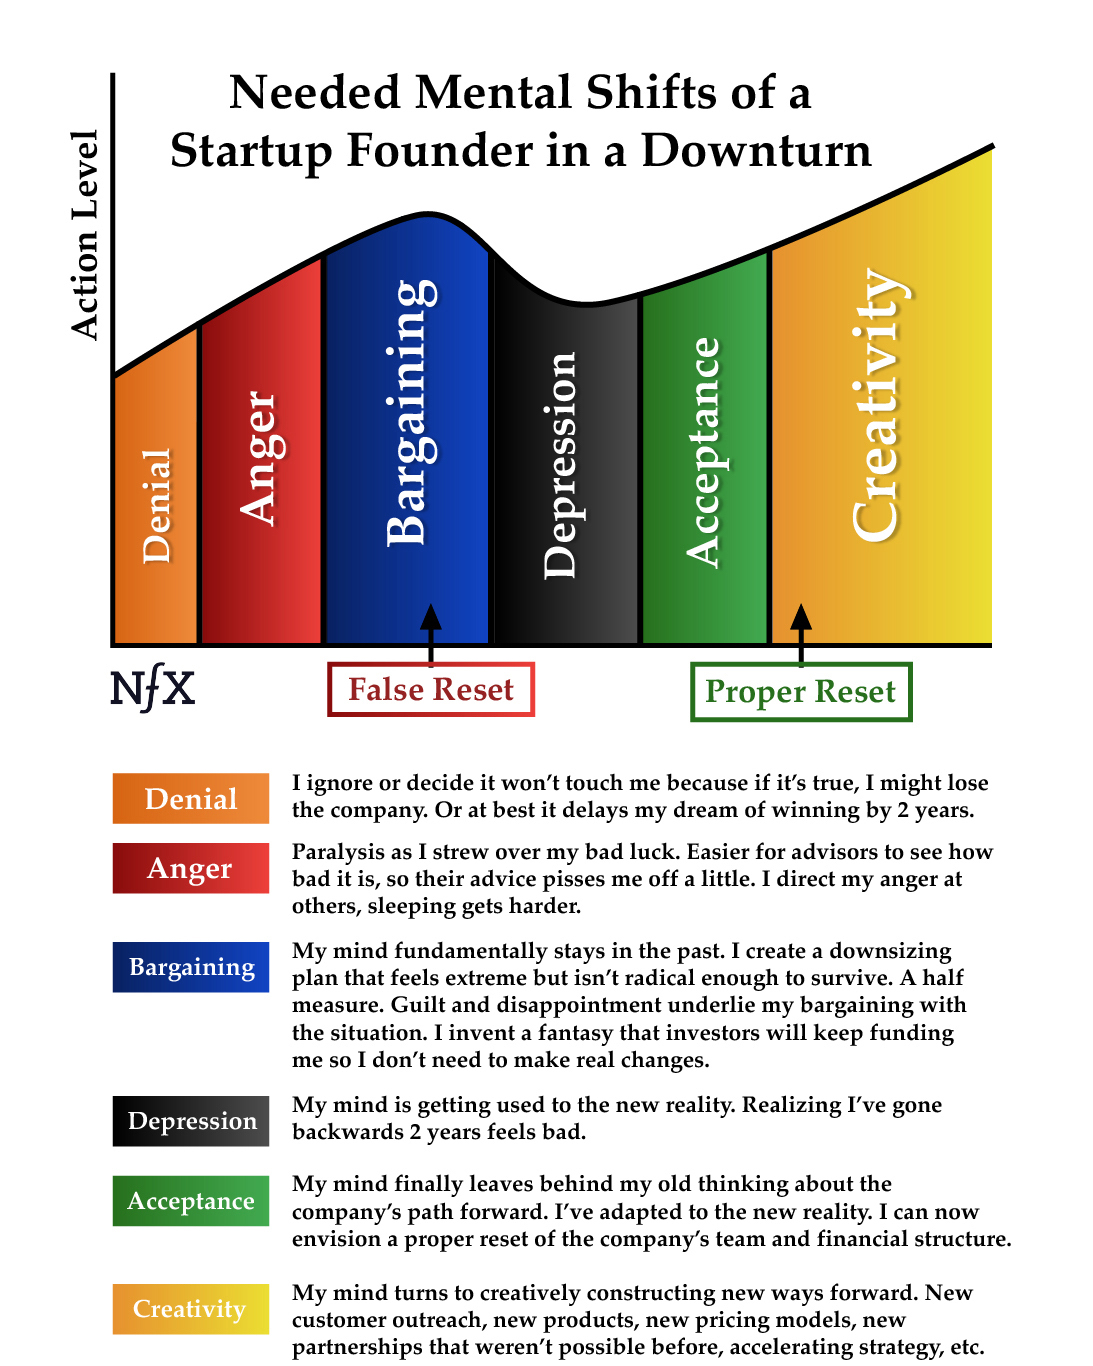 Needed Mental Shifts of a Startup Founder during a Downturn